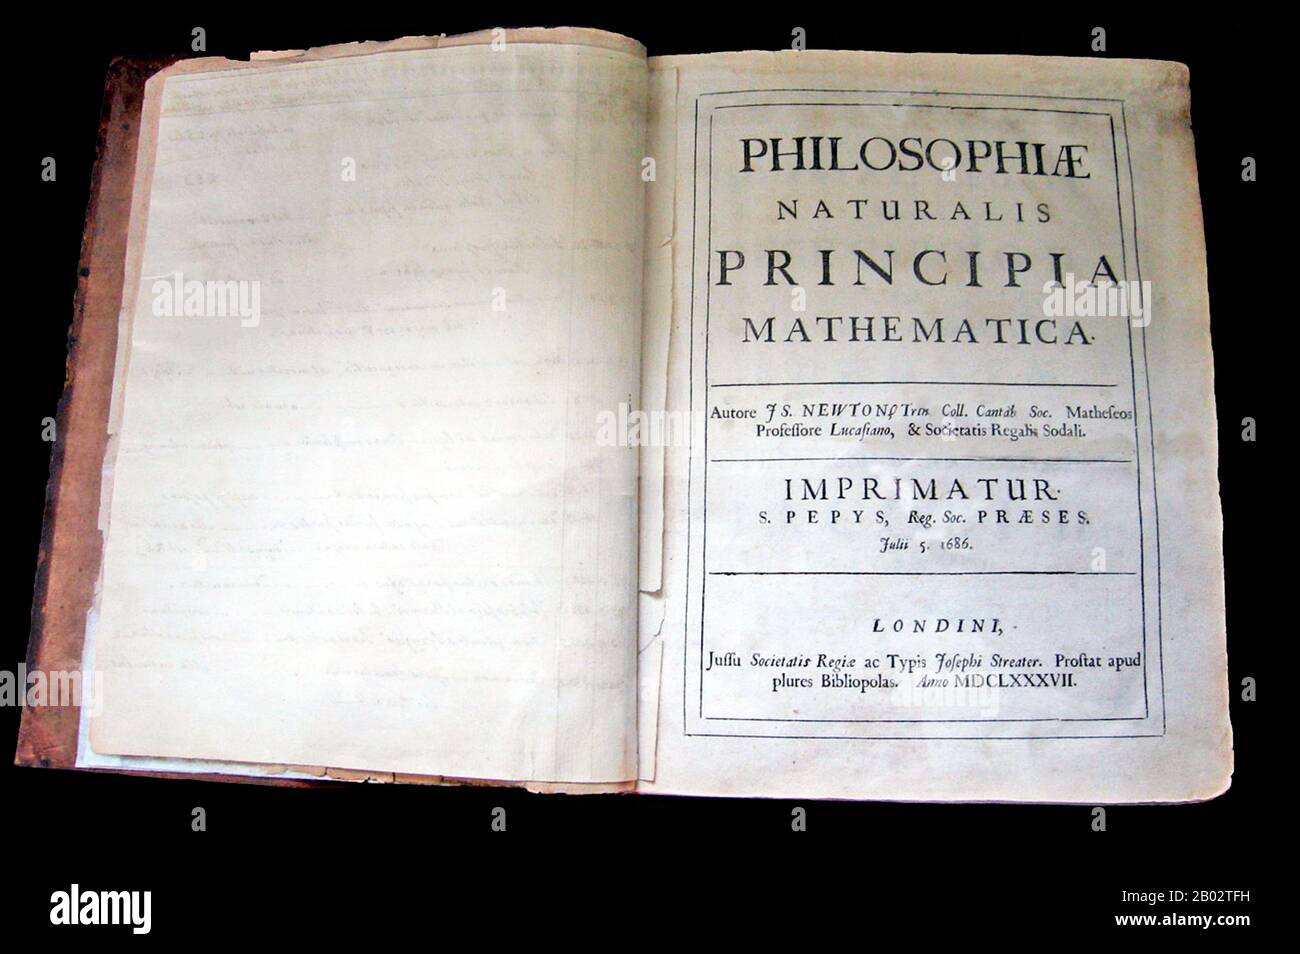 Philosophiæ Naturalis Principia Mathematica, Latin for 'Mathematical Principles of Natural Philosophy', often referred to as simply the Principia, is a work in three books by Sir Isaac Newton, in Latin, first published 5 July 1687.  After annotating and correcting his personal copy of the first edition, Newton also published two further editions, in 1713 and 1726. The Principia states Newton's laws of motion, forming the foundation of classical mechanics, also Newton's law of universal gravitation, and a derivation of Kepler's laws of planetary motion (which Kepler first obtained empirically). Stock Photo